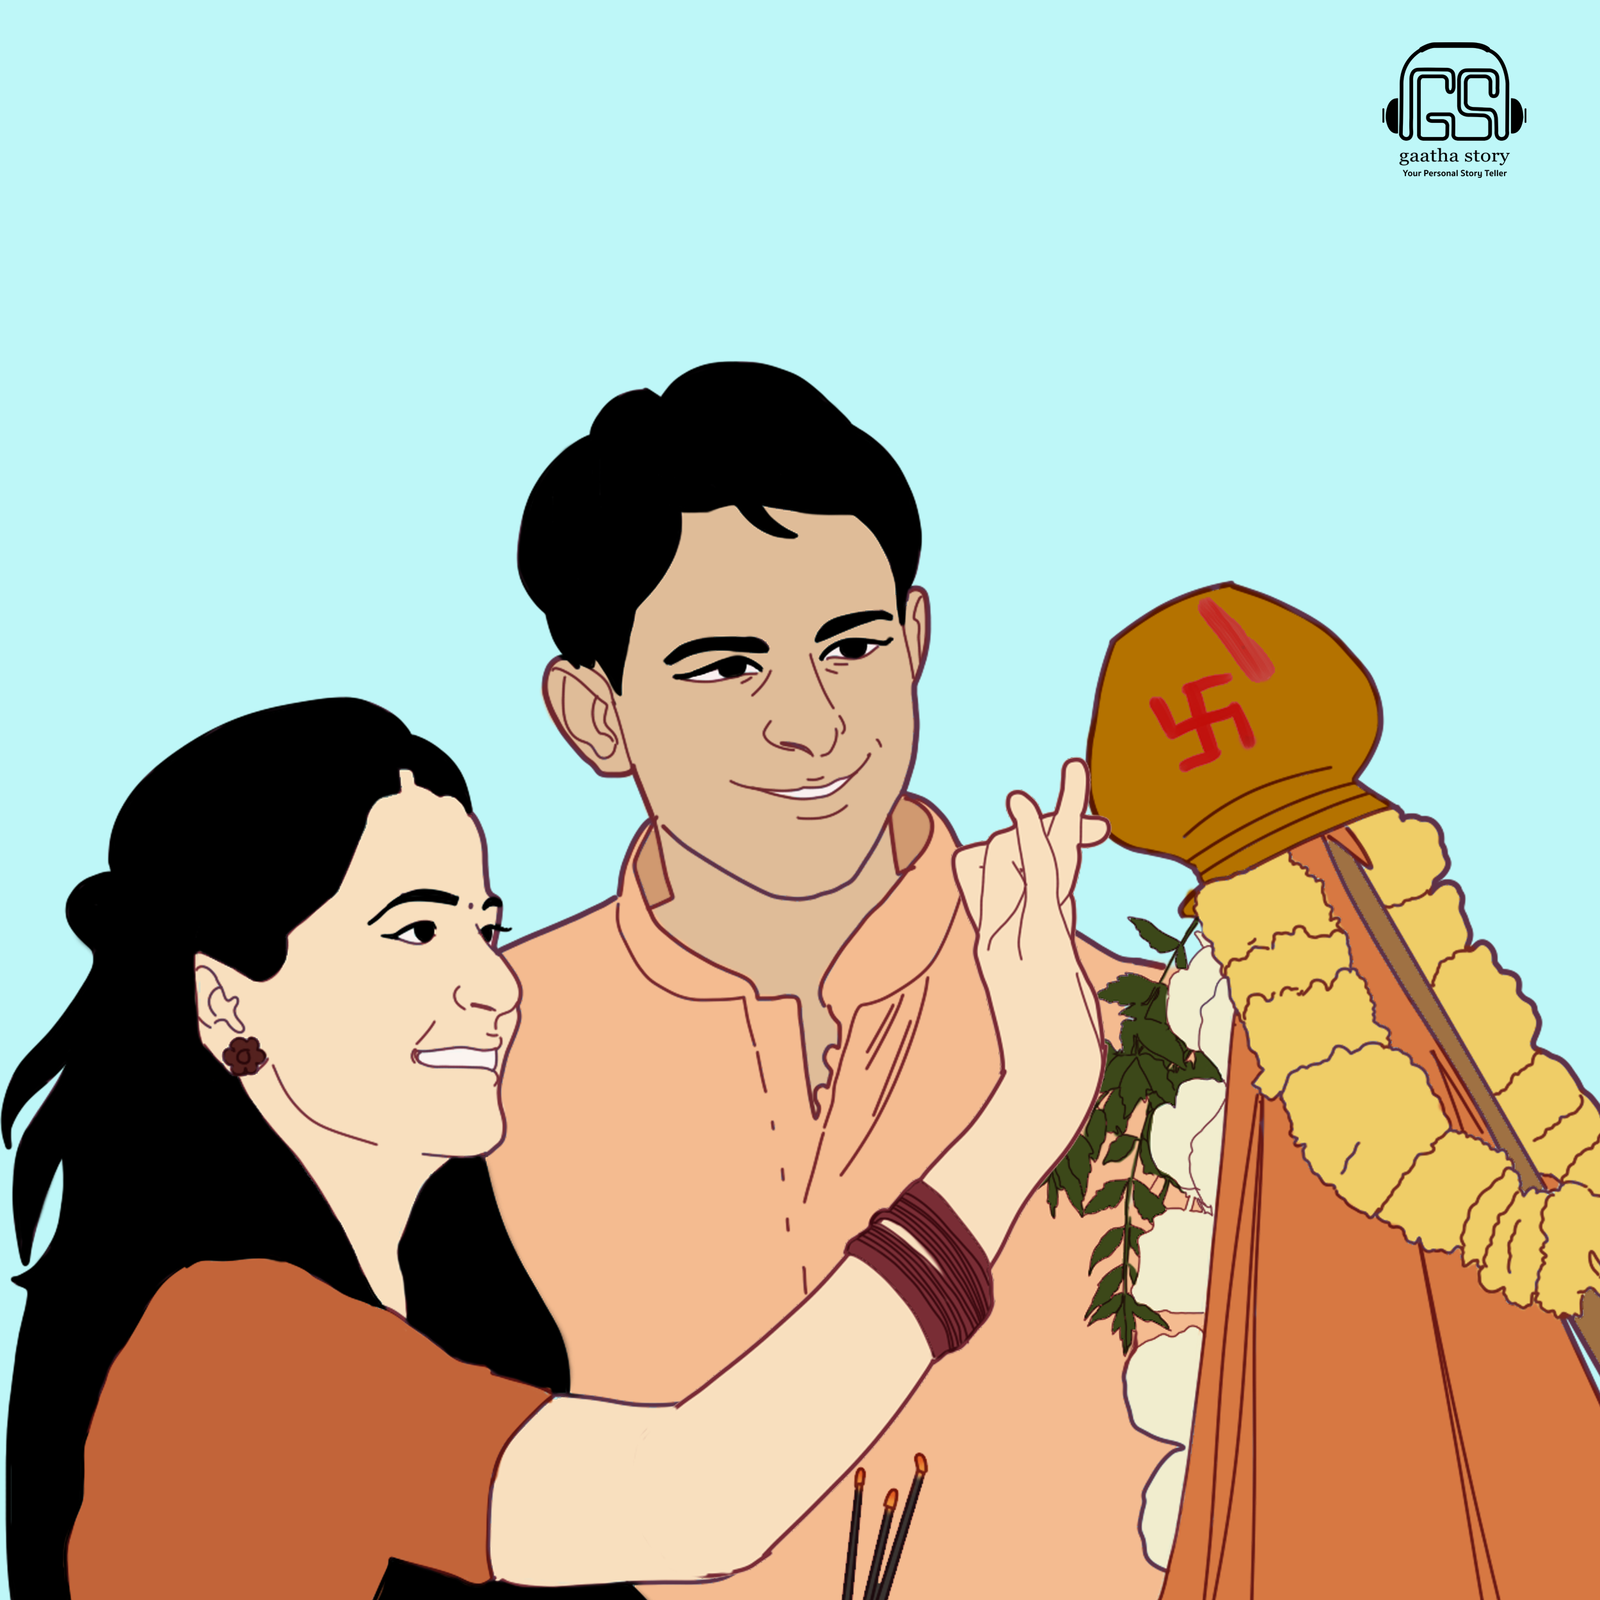 The Story Of Gudi Padwa Or Ugadi Baalgatha Classic Stories For Children Podcast Podtail Ugadi, a new year celebration in states like andhra pradesh, telangana and karnataka, falls on march 28 this year. the story of gudi padwa or ugadi